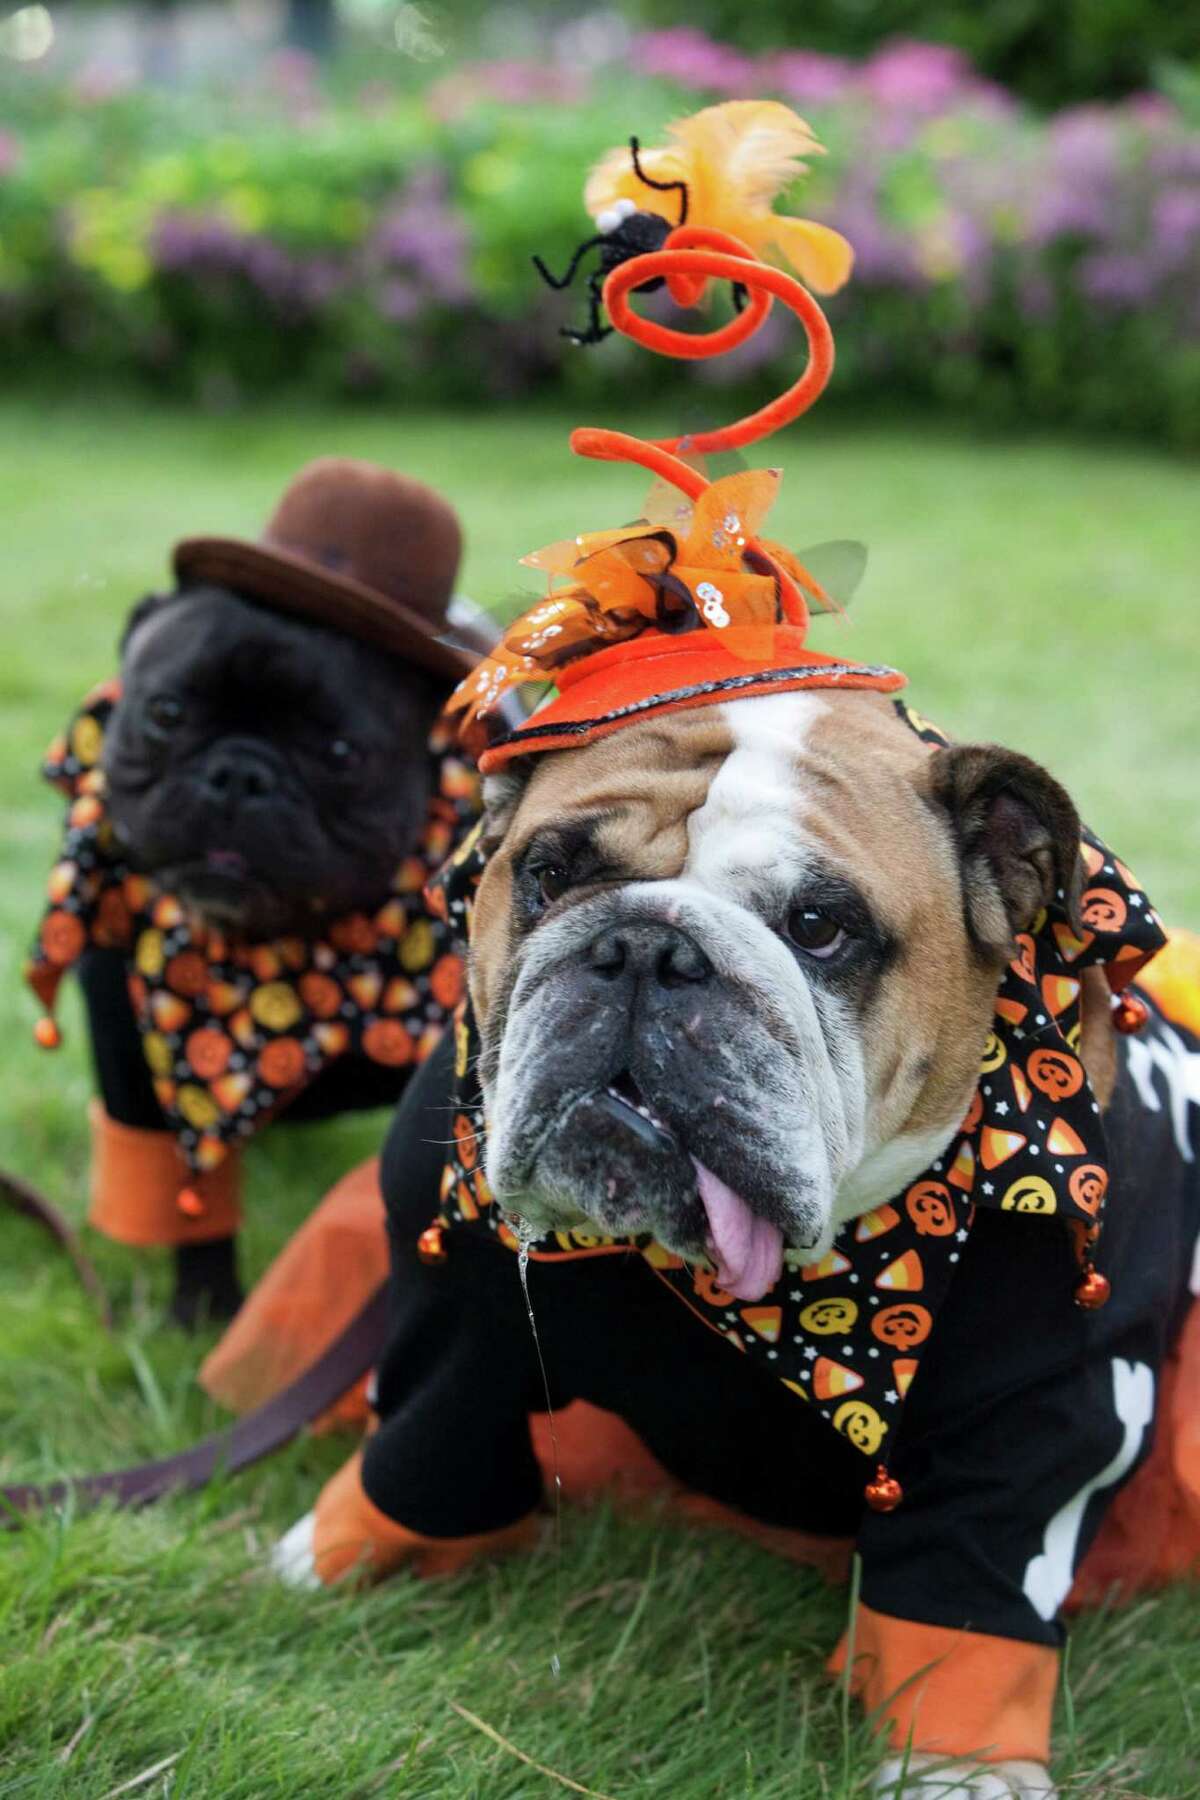 Halloween is going to the dogs